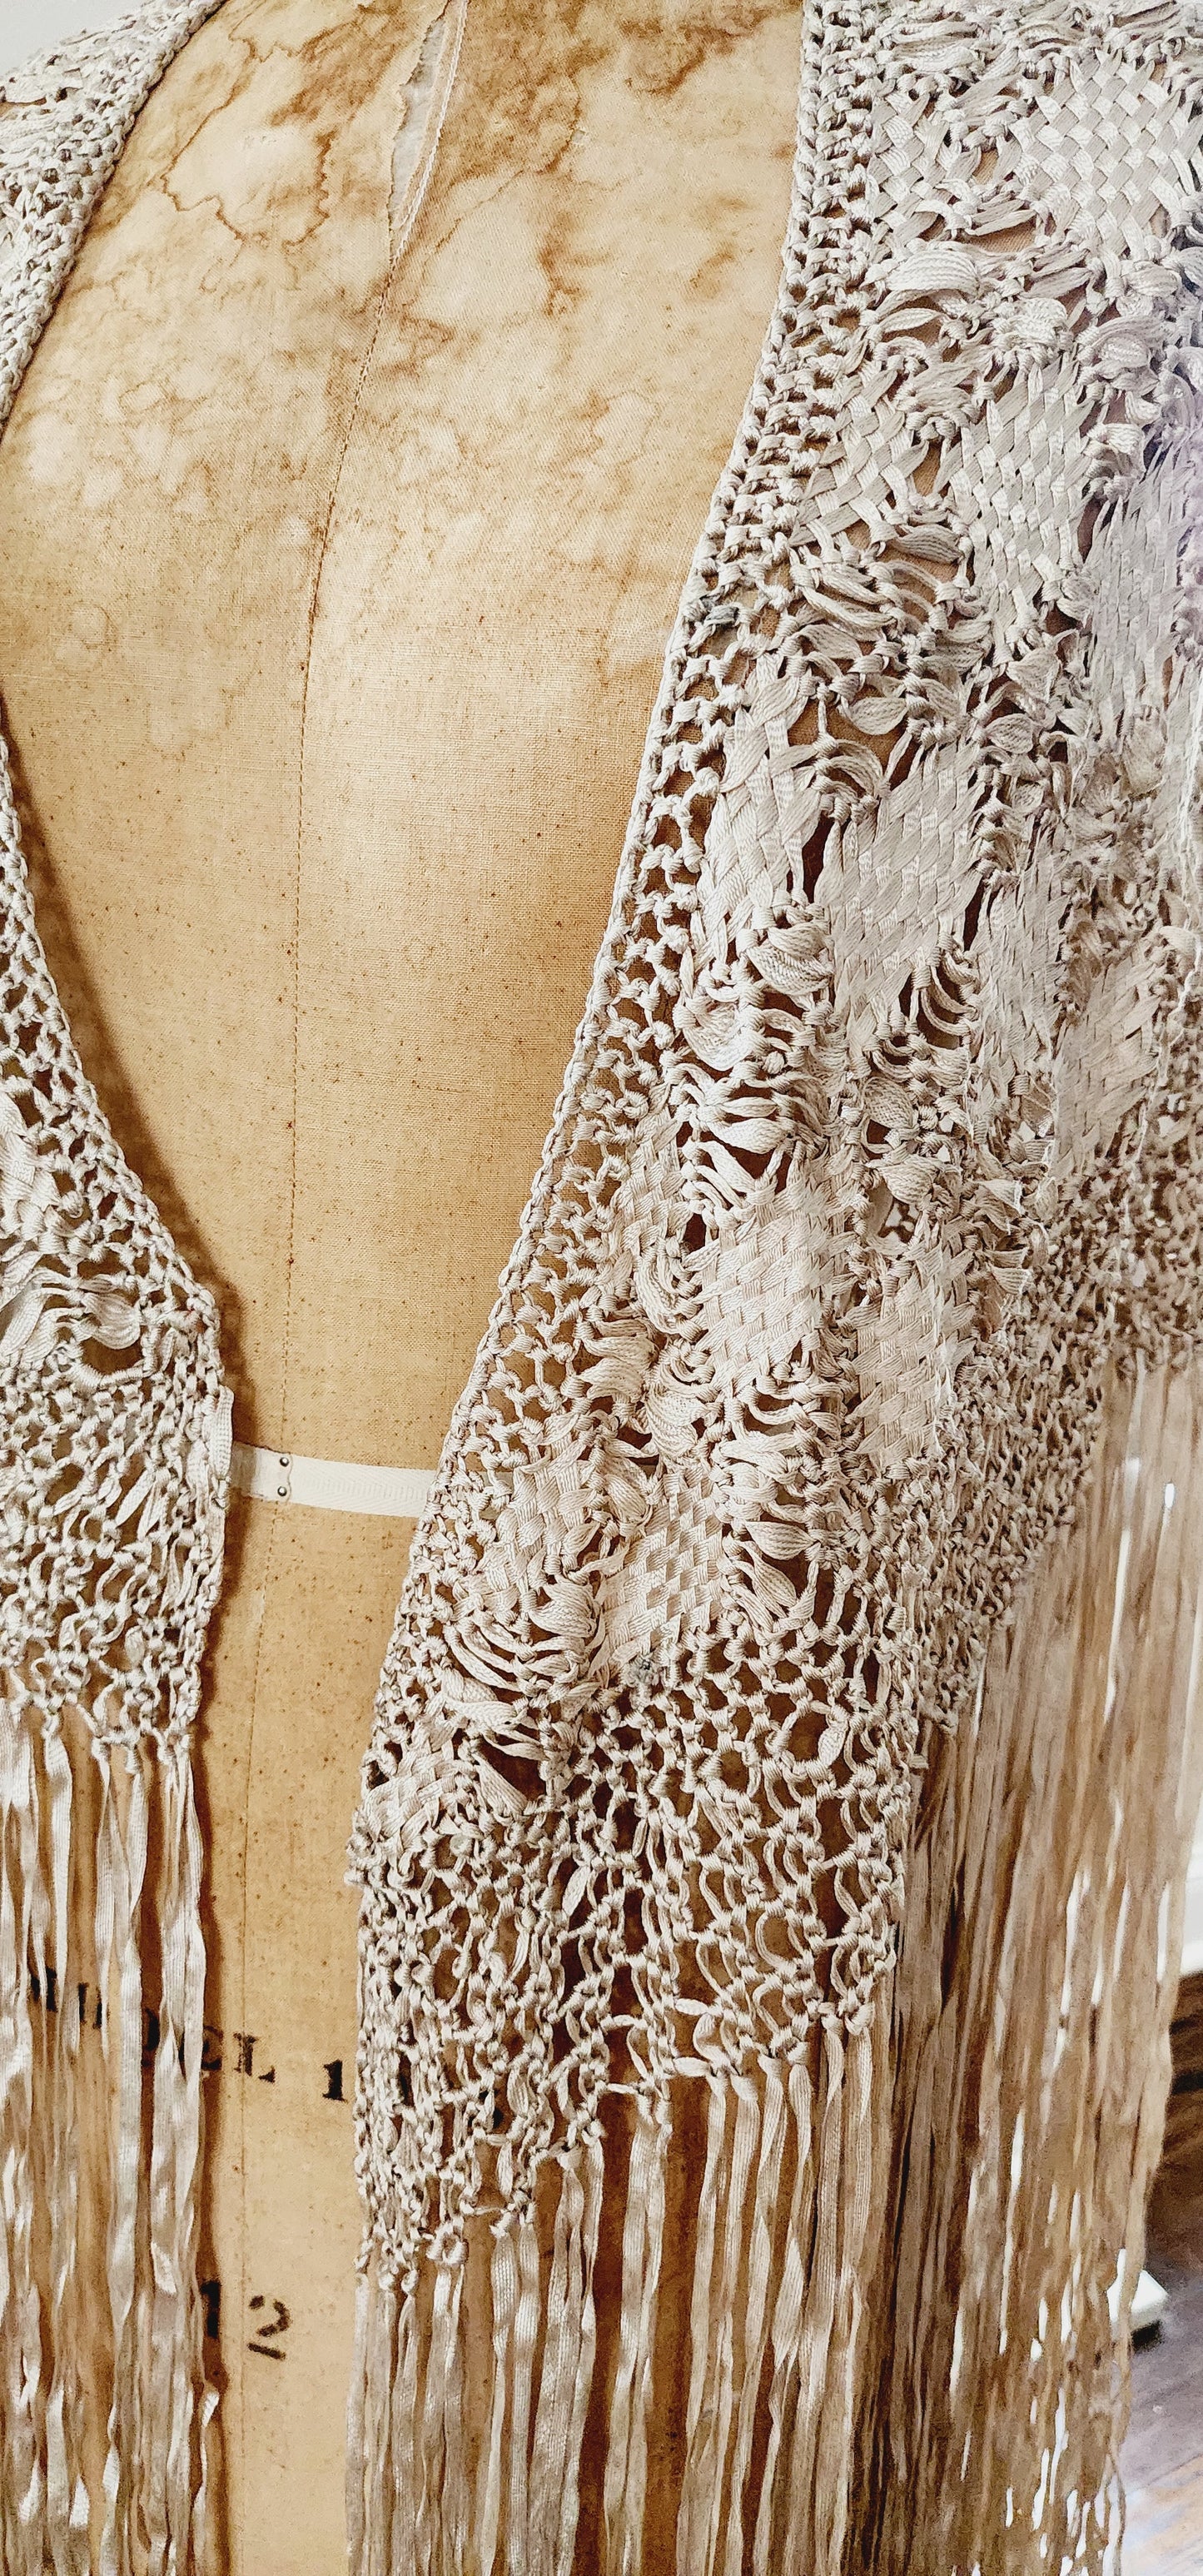 Vintage Cream Shawl or Wrap Silk Knit with Long Fringe and Openwork Lace / Neo-Edwardian